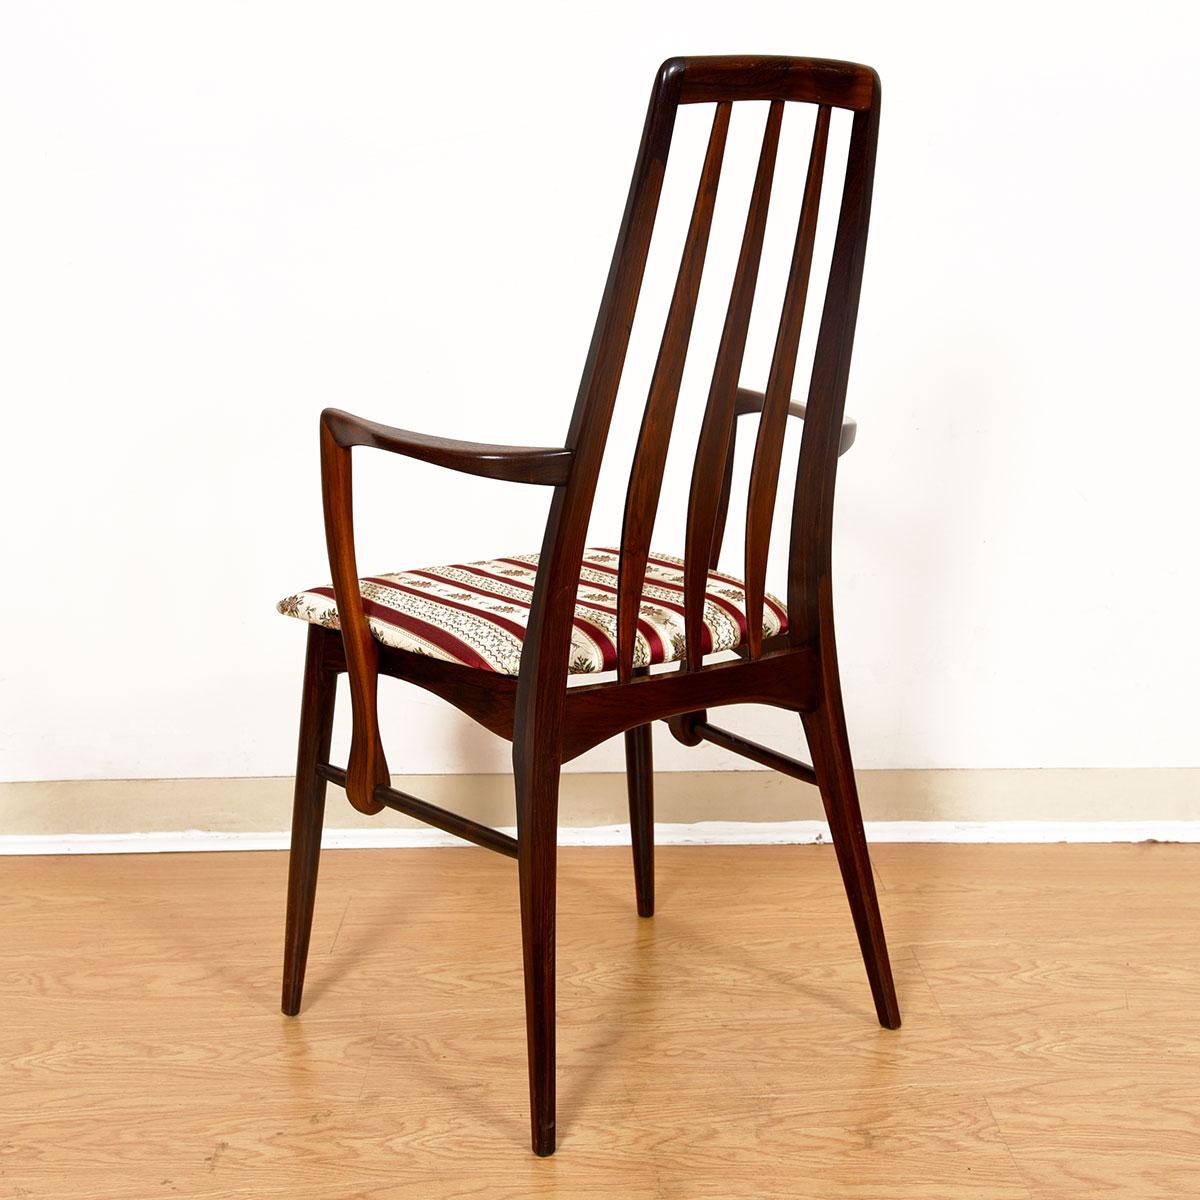 20th Century Pair of Danish Rosewood Arm Chairs by Koefoeds Hornslet For Sale